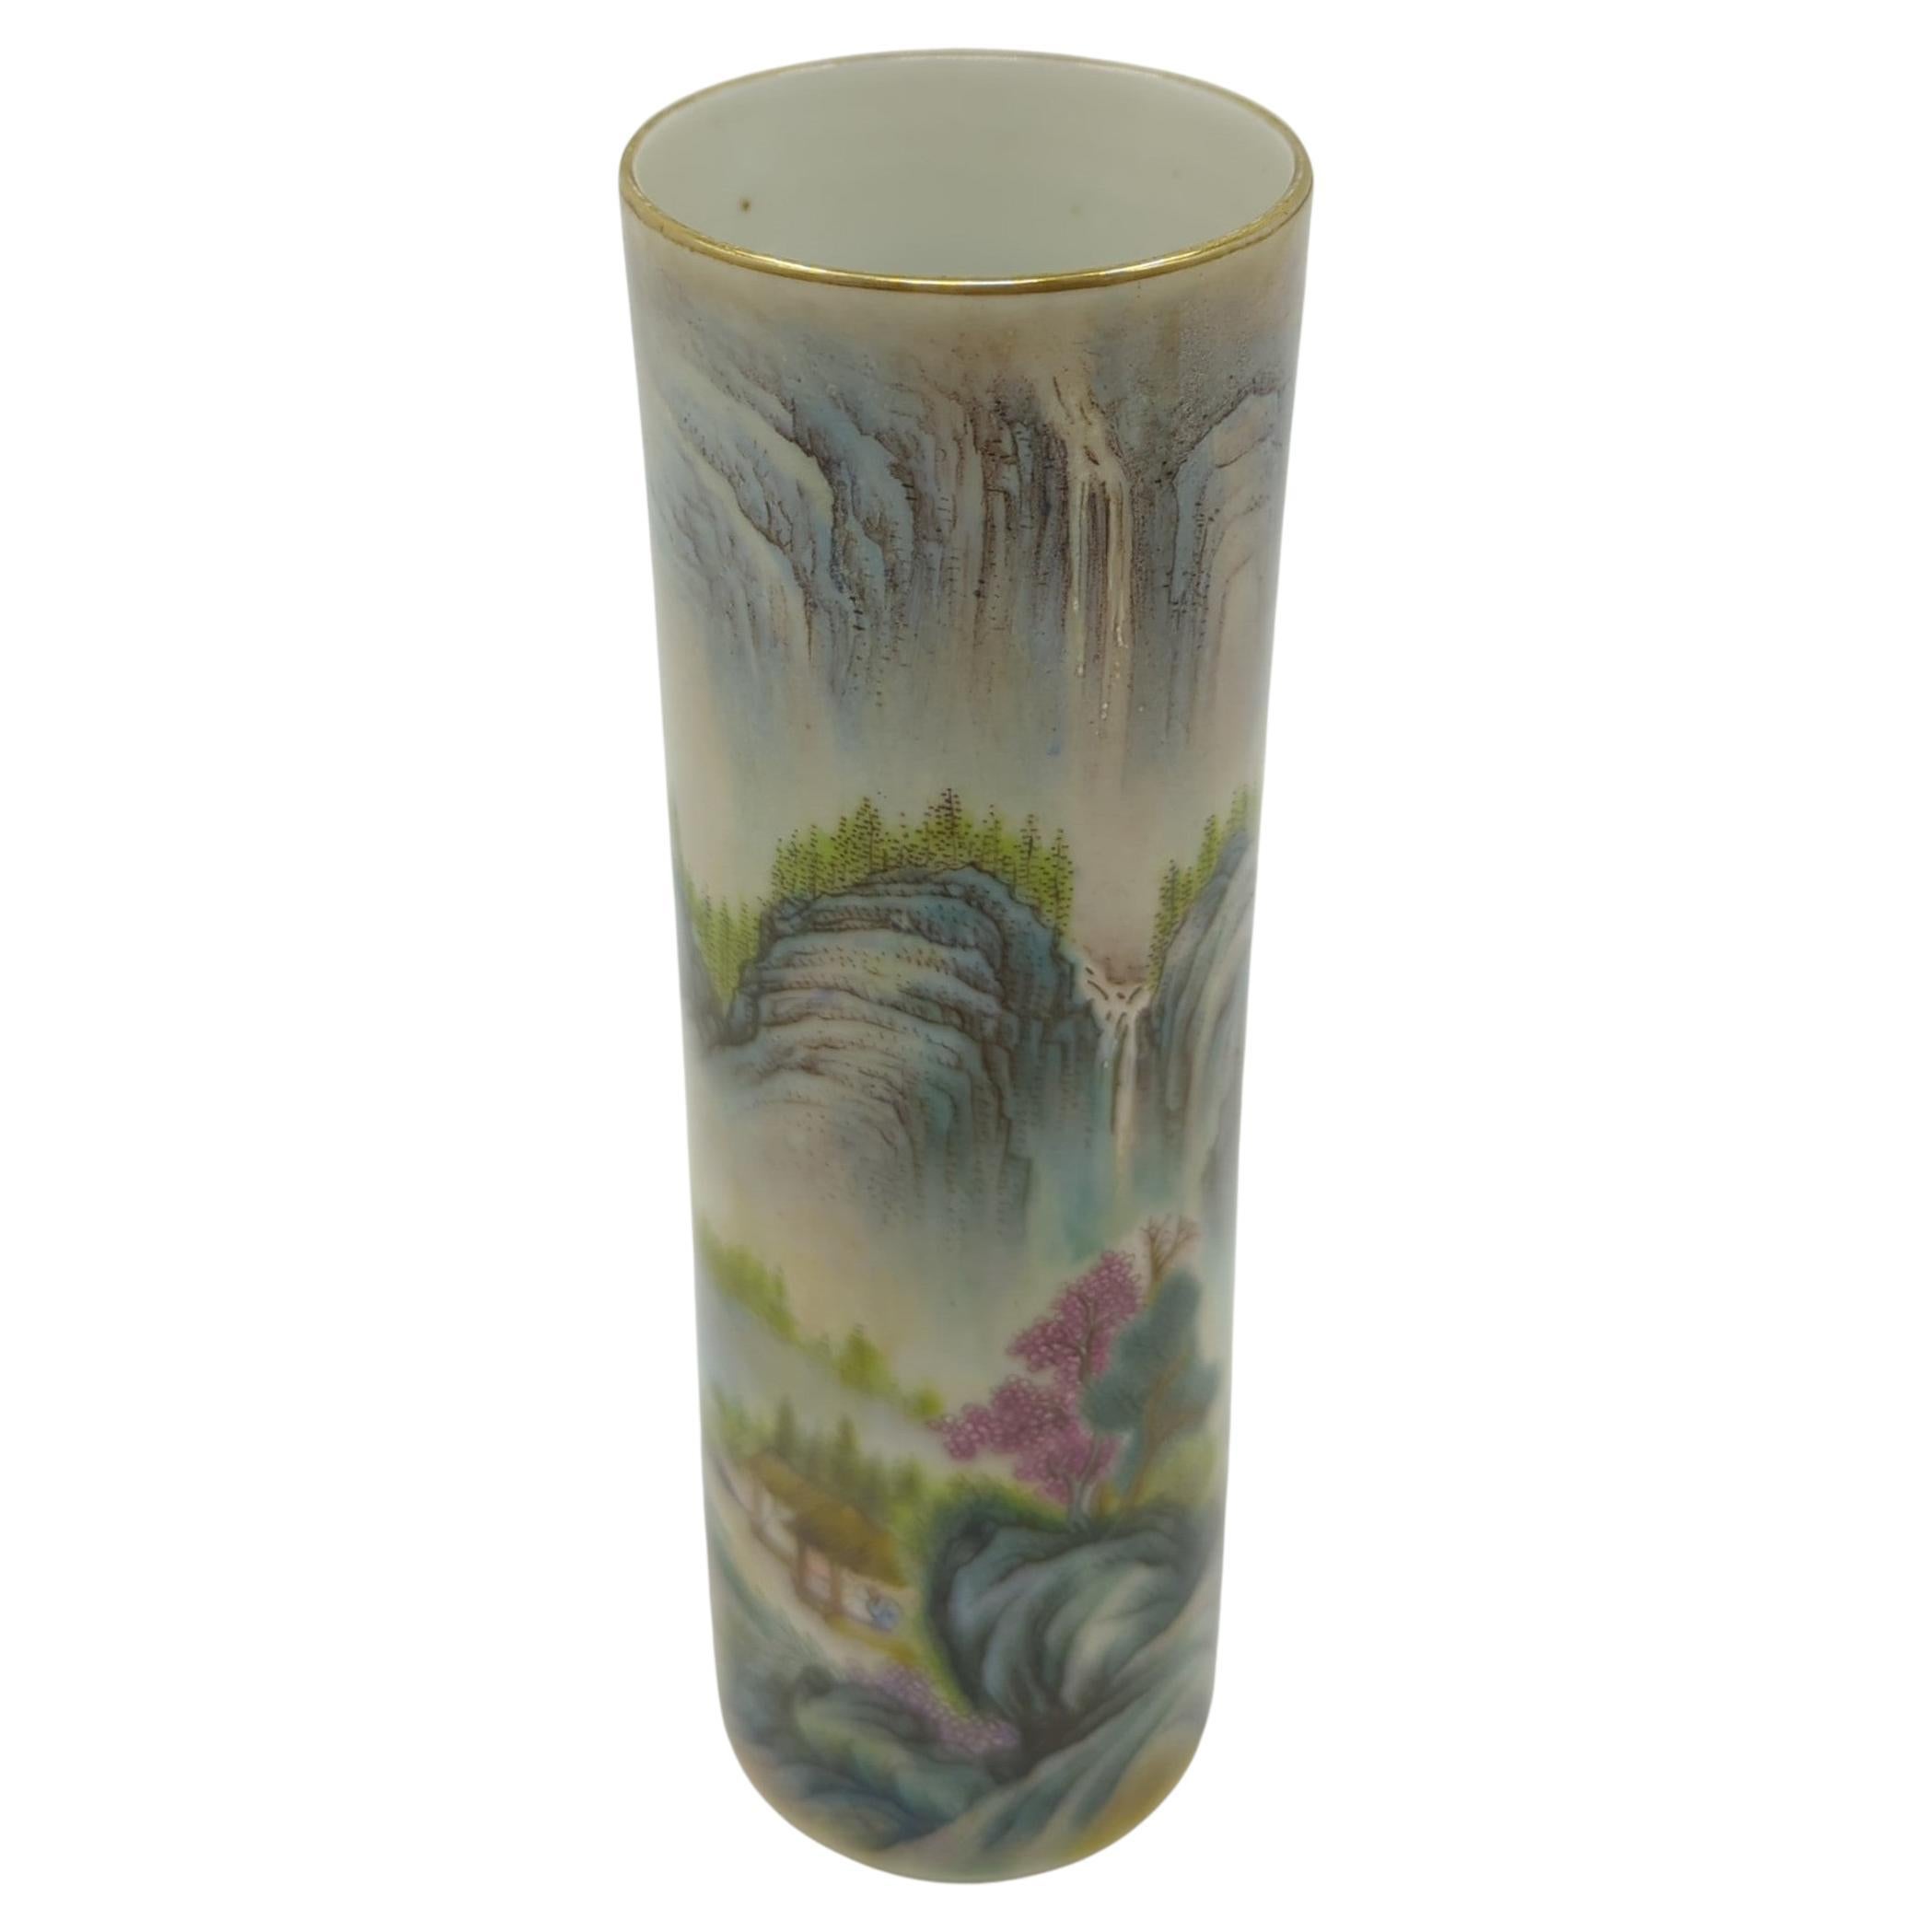 20th Century Finest Chinese Famille Rose Fencai Shanshui Cylinder Vase Gilt Rim Early 20th C For Sale